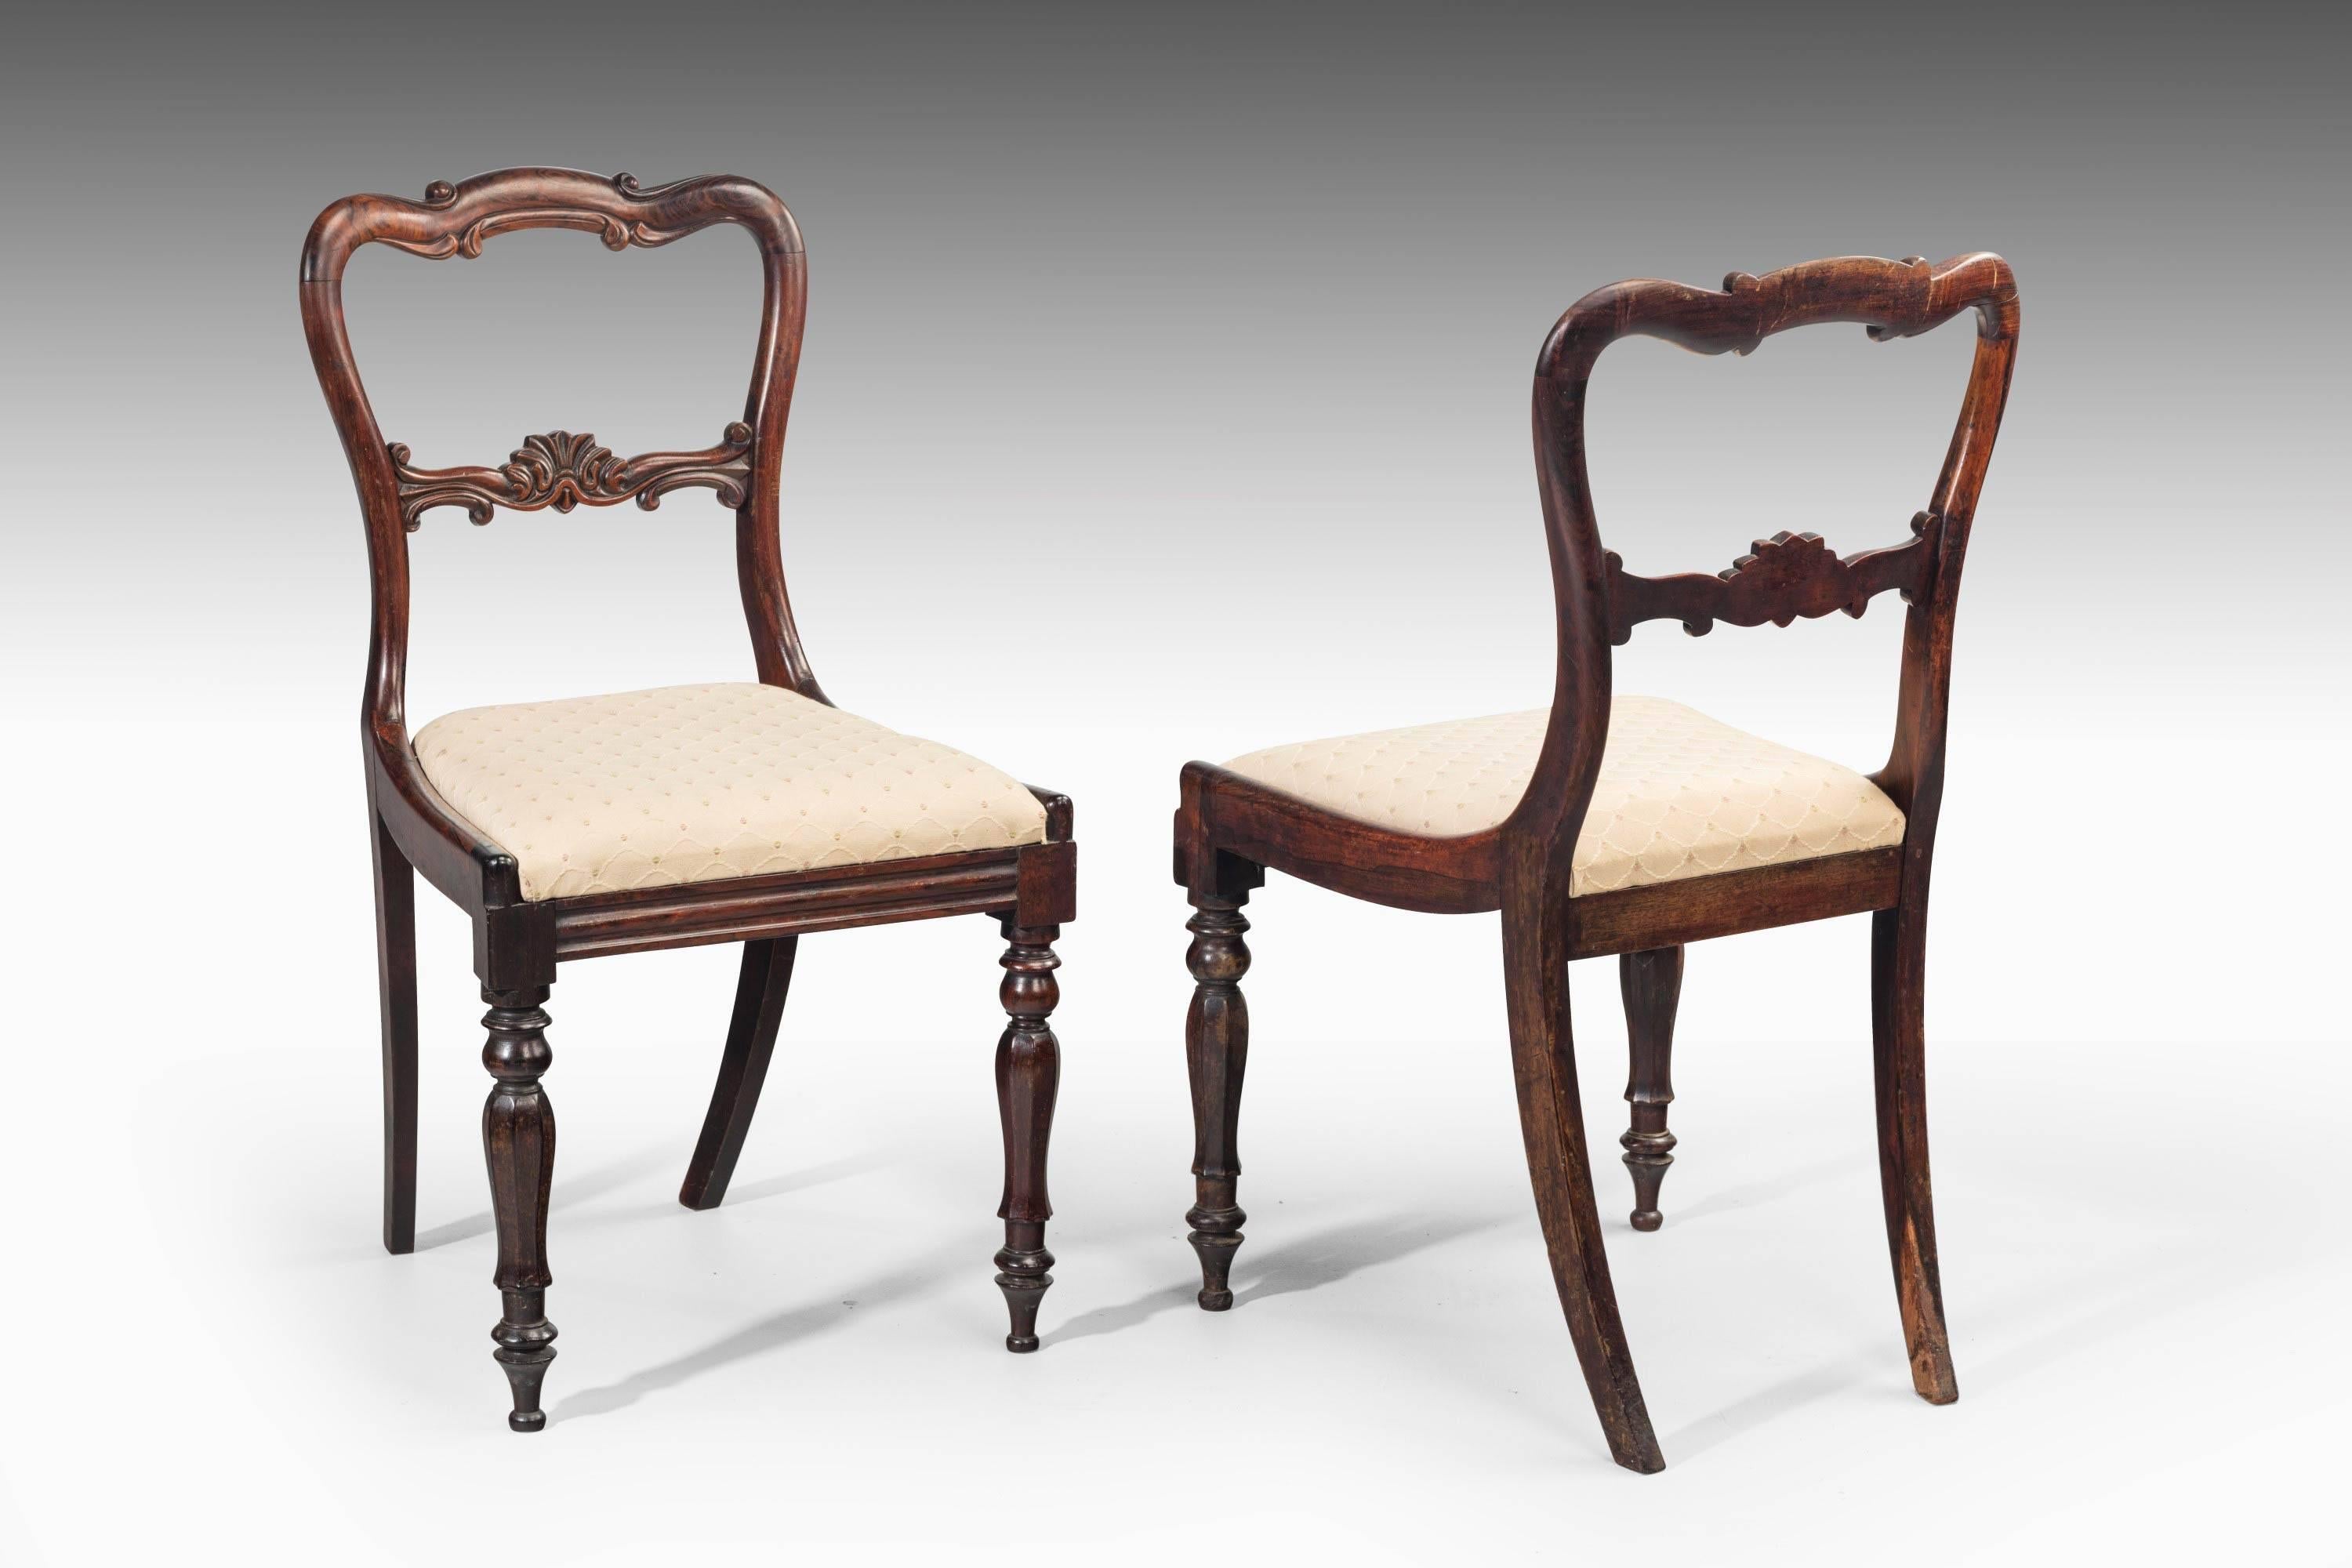 An attractive set of four early Victorian period single chairs with well-shaped and carved backs. Turned tapering supports.

Measure: Seat height is 17 inches.